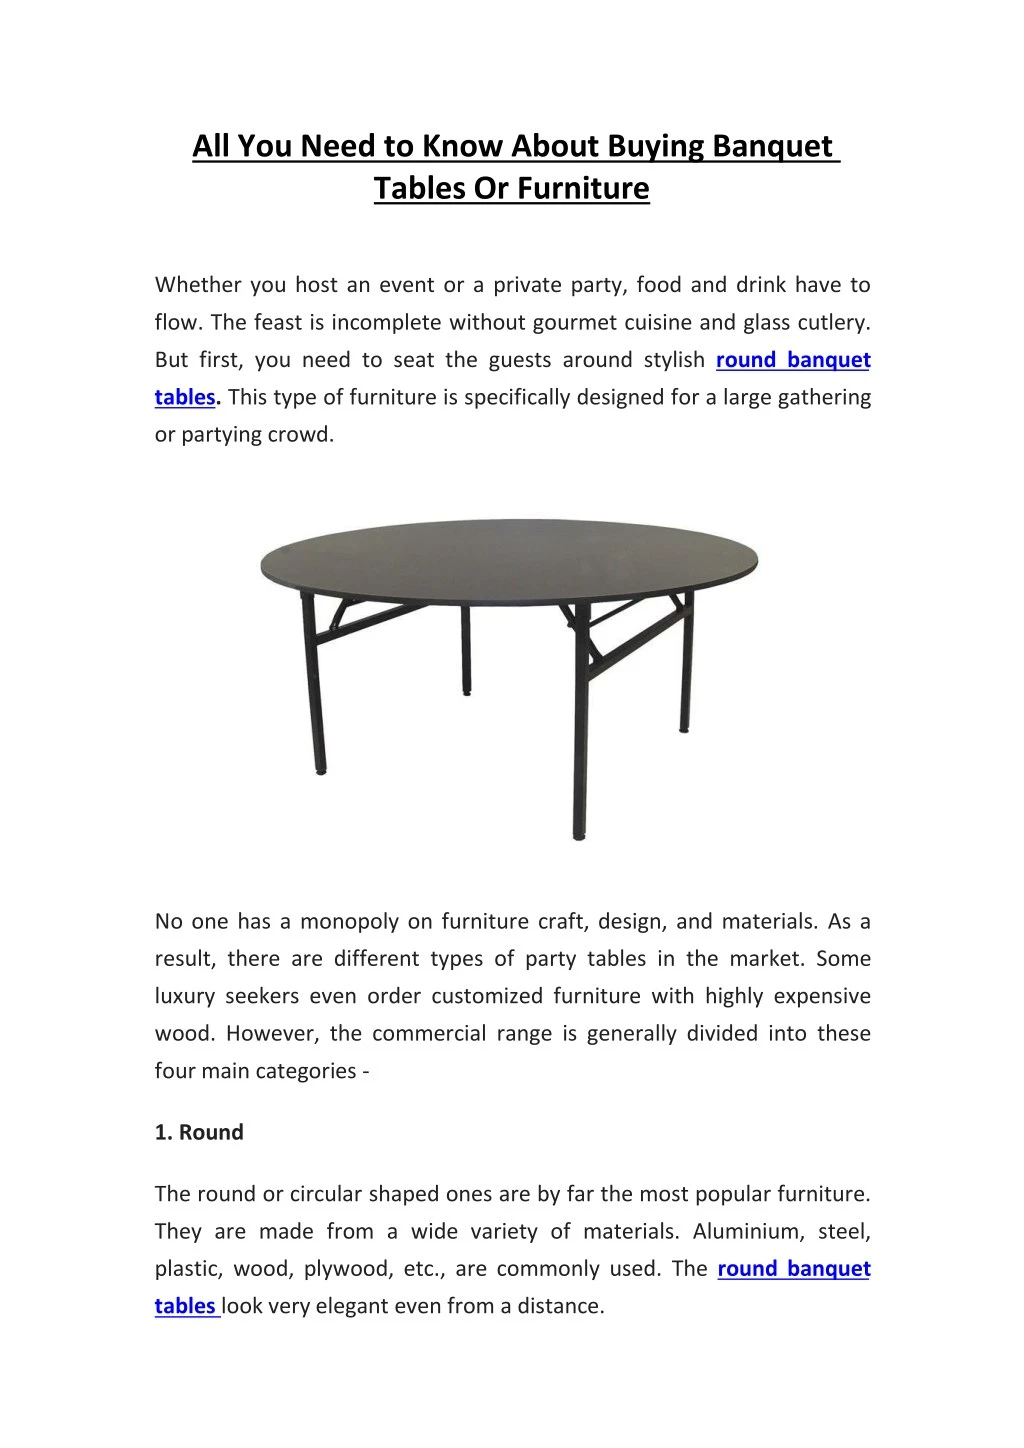 all you need to know about buying banquet tables